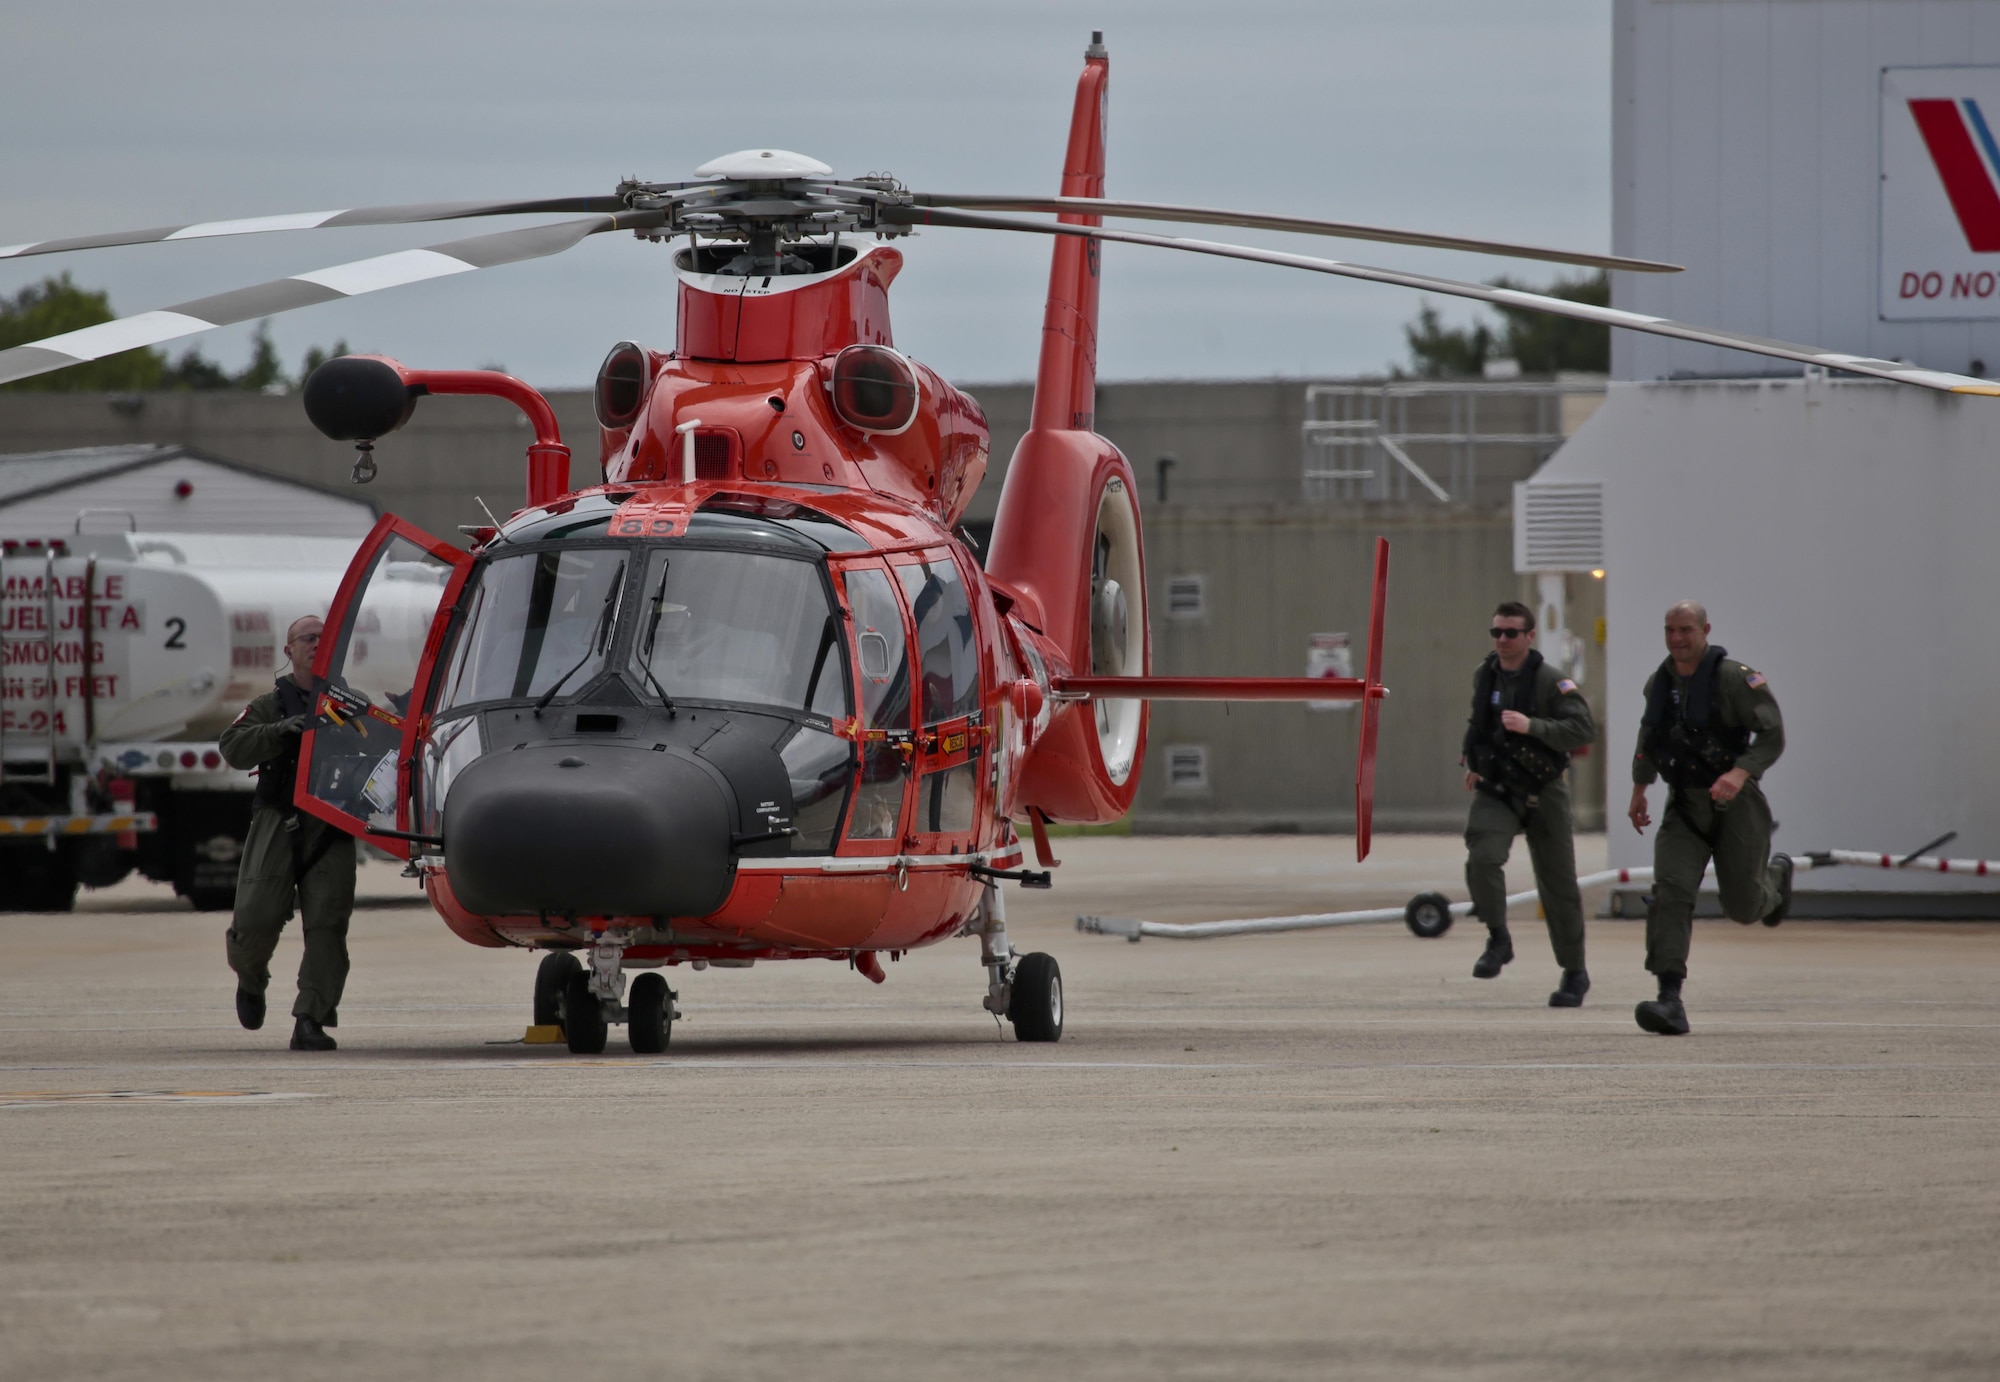 A U.S. Coast Guard HH-65C Dolphin helicopter crew from Coast Guard Air Station Atlantic City rushes to their aircraft after an alert during a three-day Aeropsace Control Alert CrossTell live-fly training exercise at Atlantic City International Airport, N.J., May 24, 2017. Representatives from the Air National Guard fighter wings, Civil Air Patrol, and U.S. Coast Guard rotary-wing air intercept units will conduct daily sorties from May 23-25 to hone their skills with tactical-level air-intercept procedures. (U.S. Air National Guard photo by Master Sgt. Matt Hecht/Released)